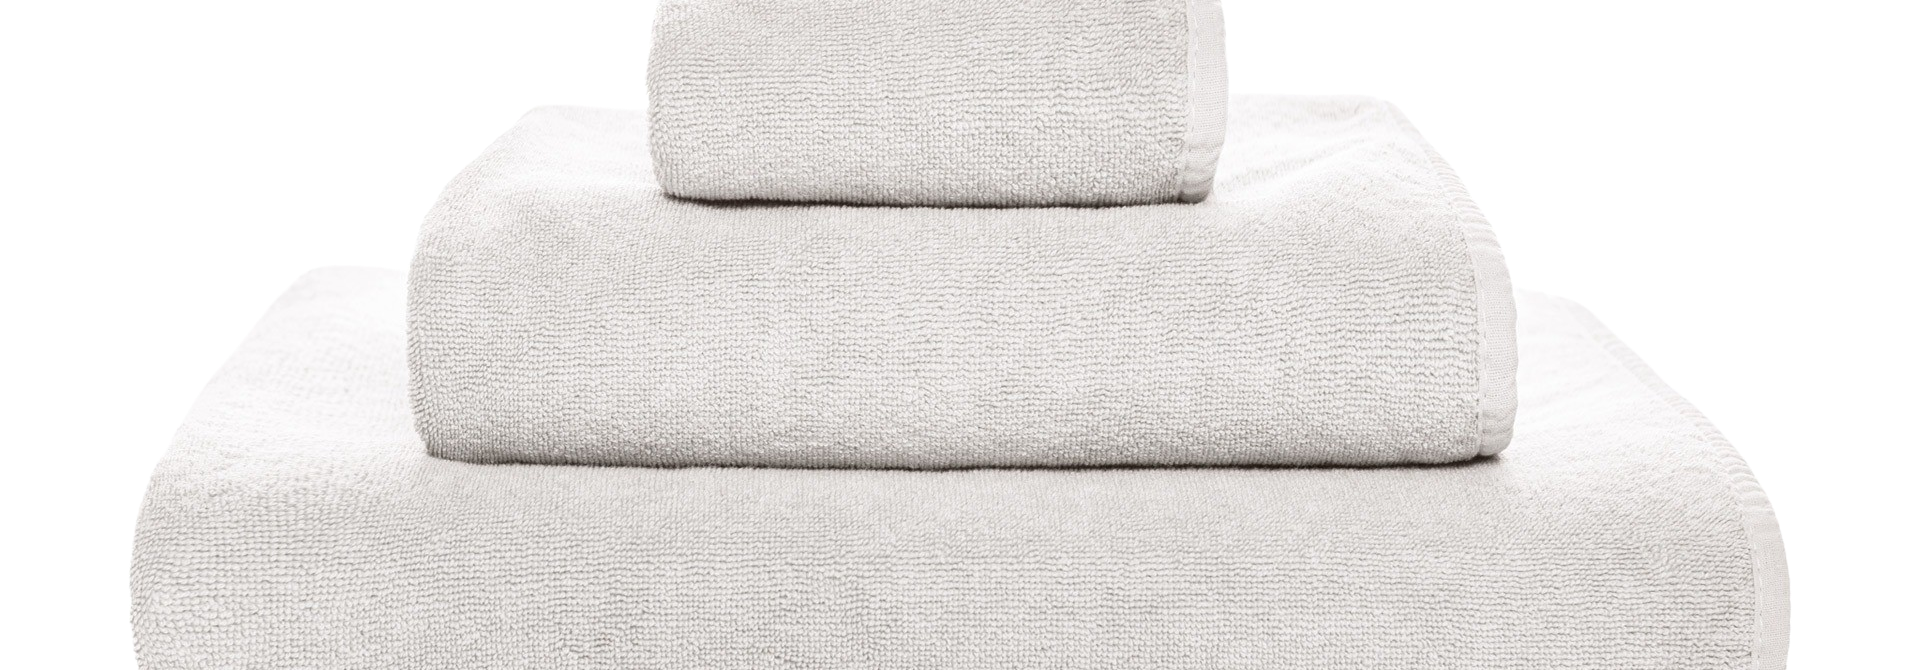 Cool Towels | The Cool Bath Collection,